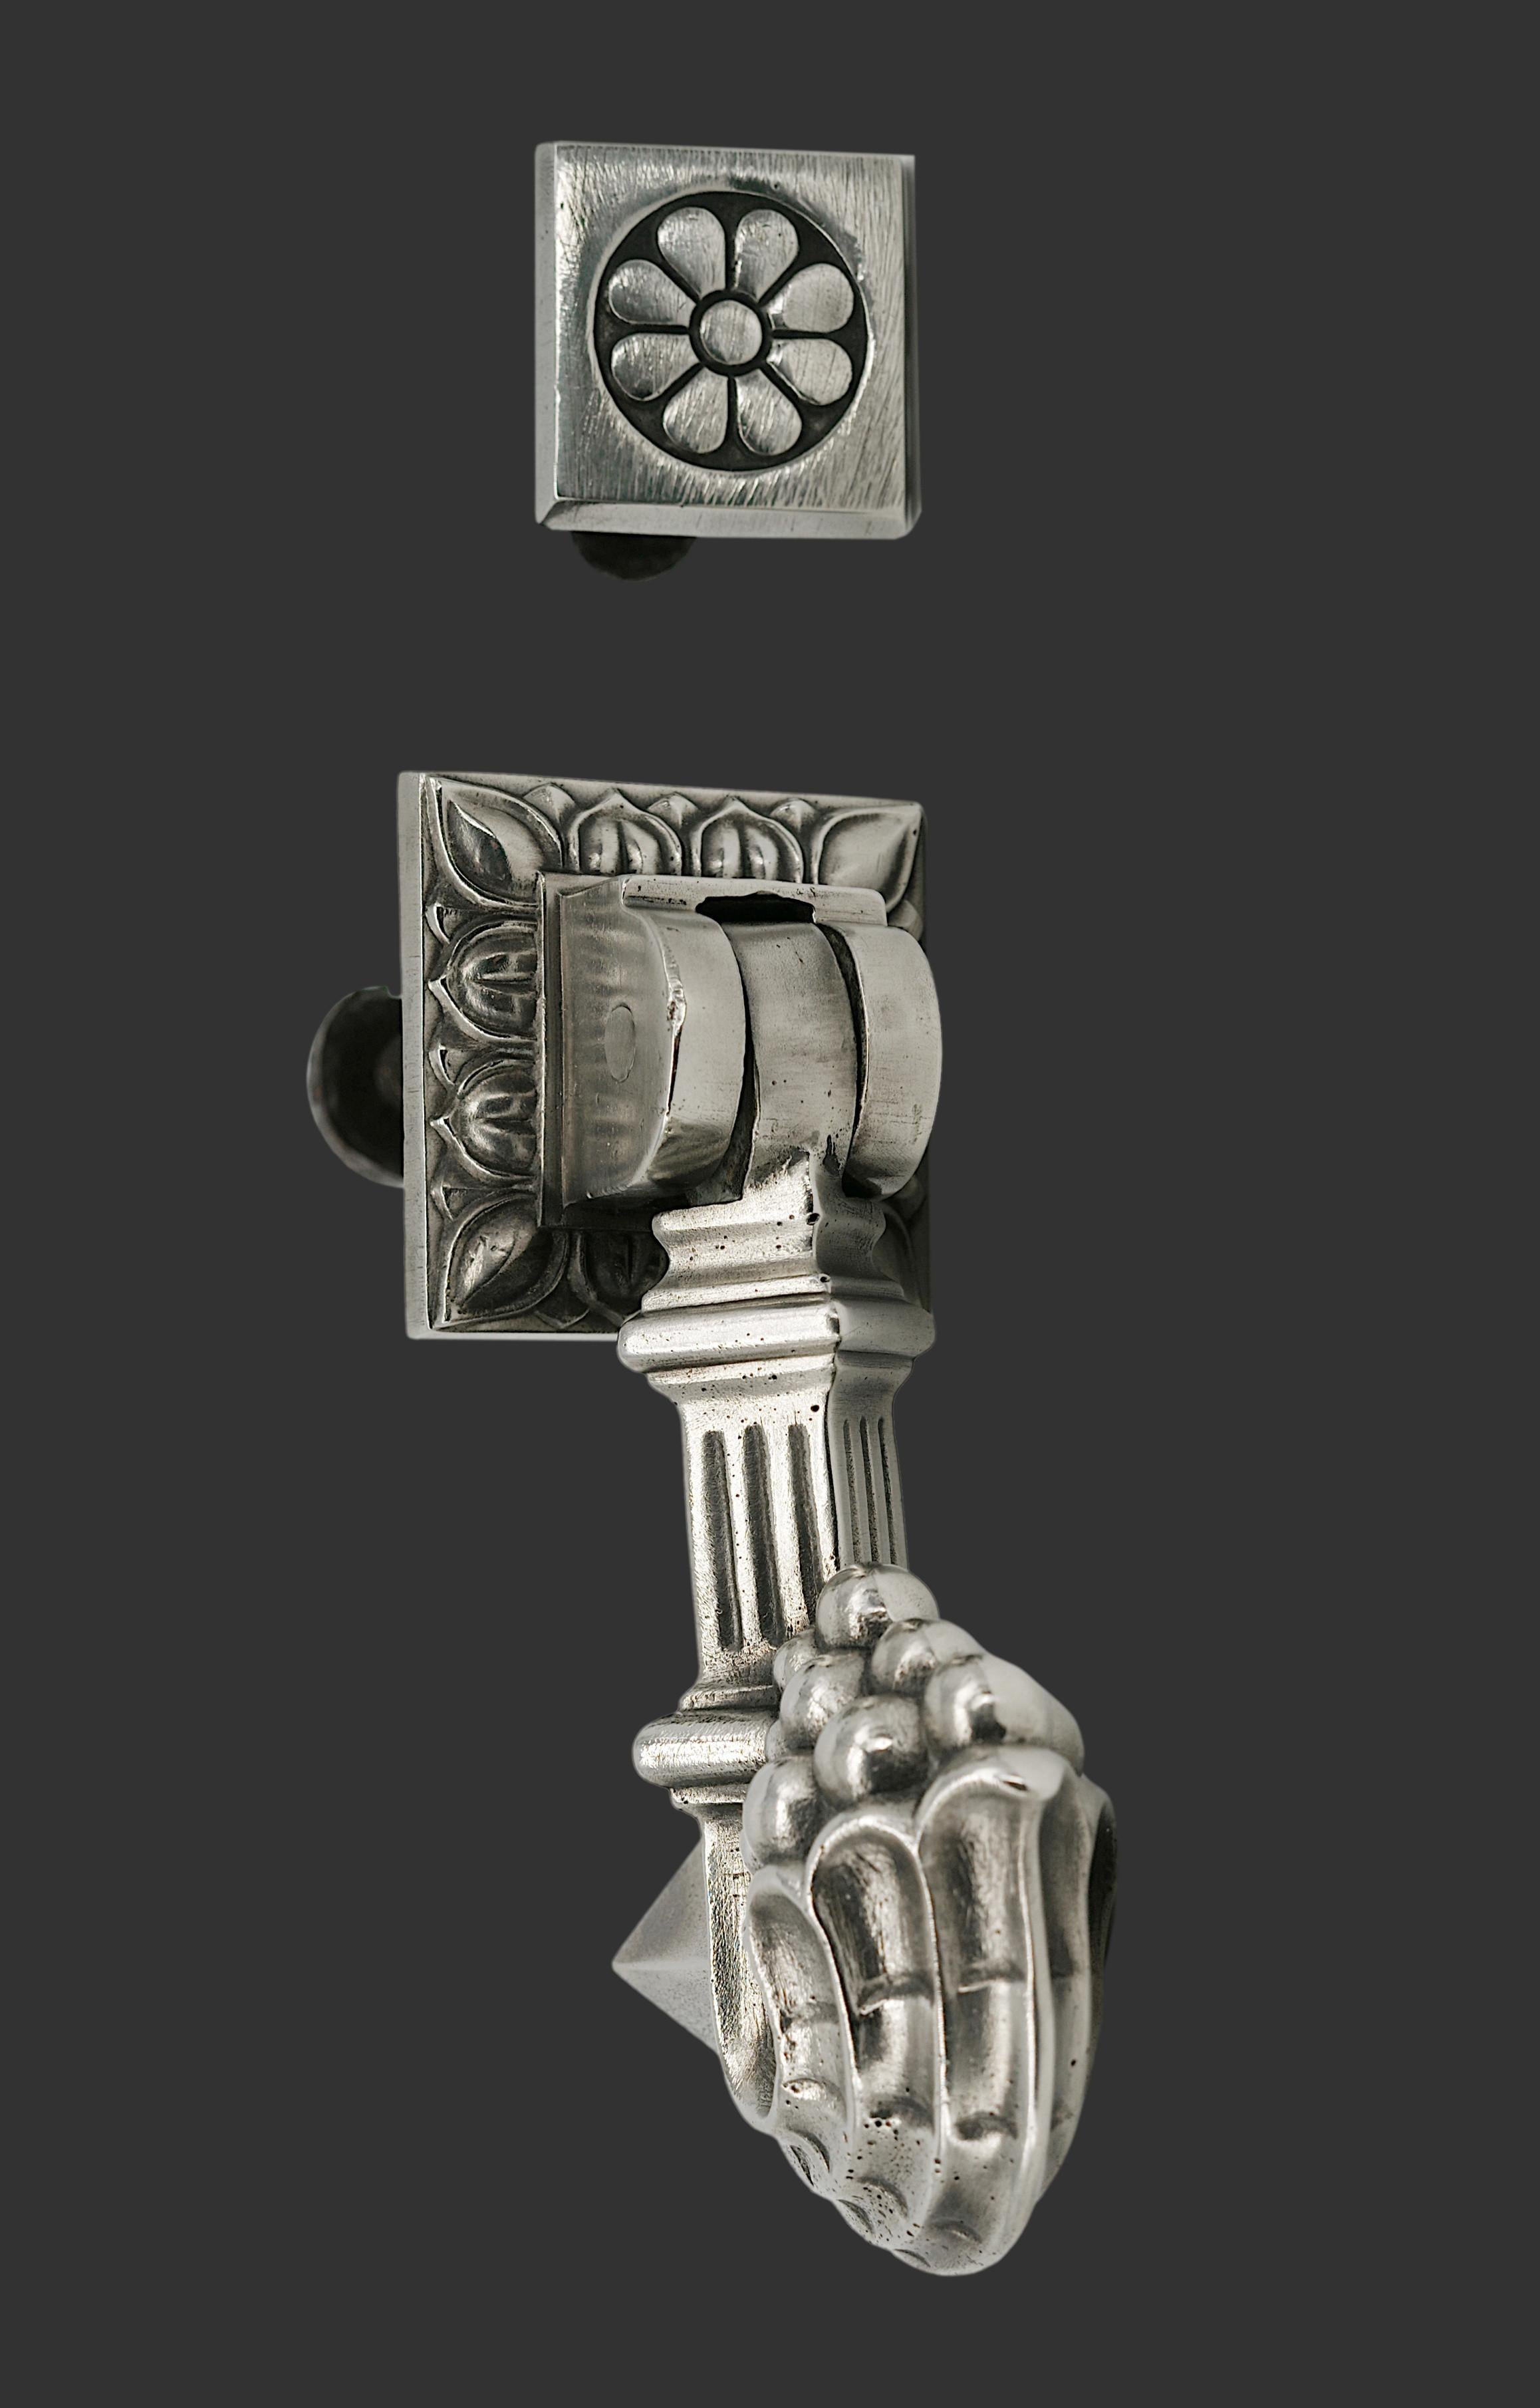 French Art Deco bronze door knocker by CAMION Freres, Vivier-au-Court, France, ca.1930. Silver-plated bronze. Cornucopia filled with fruit. Dimensions of the bigger piece placed on the door. Height: 5.6